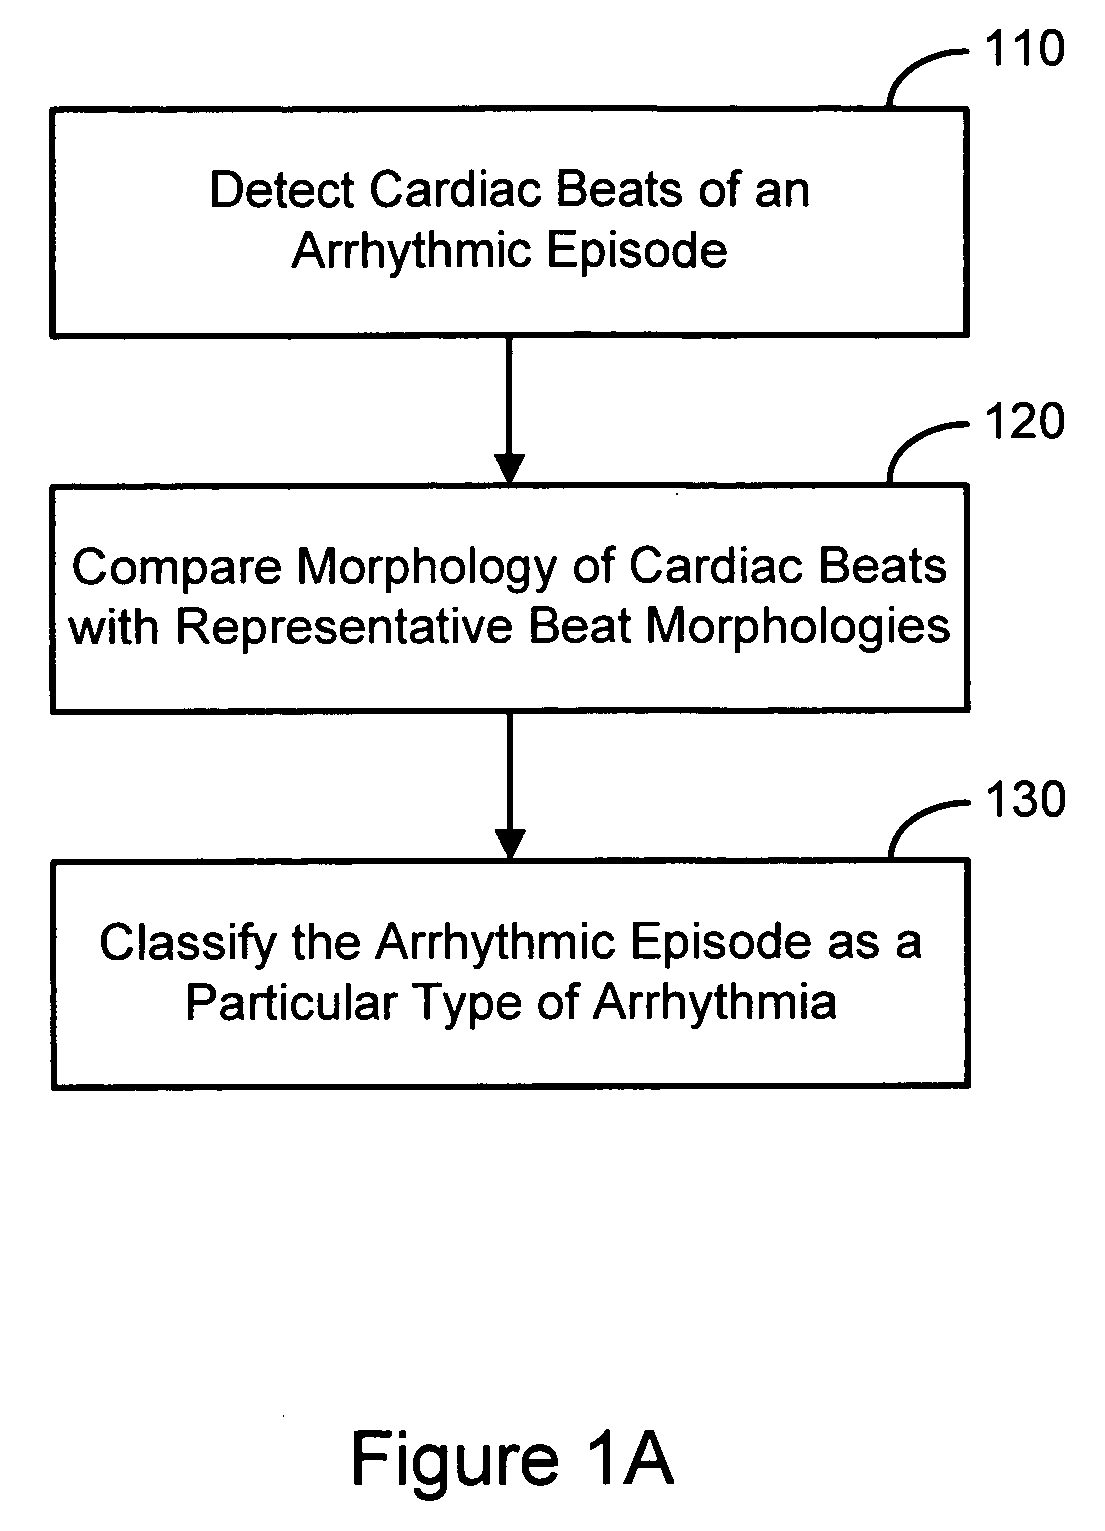 Arrhythmia classification and therapy selection